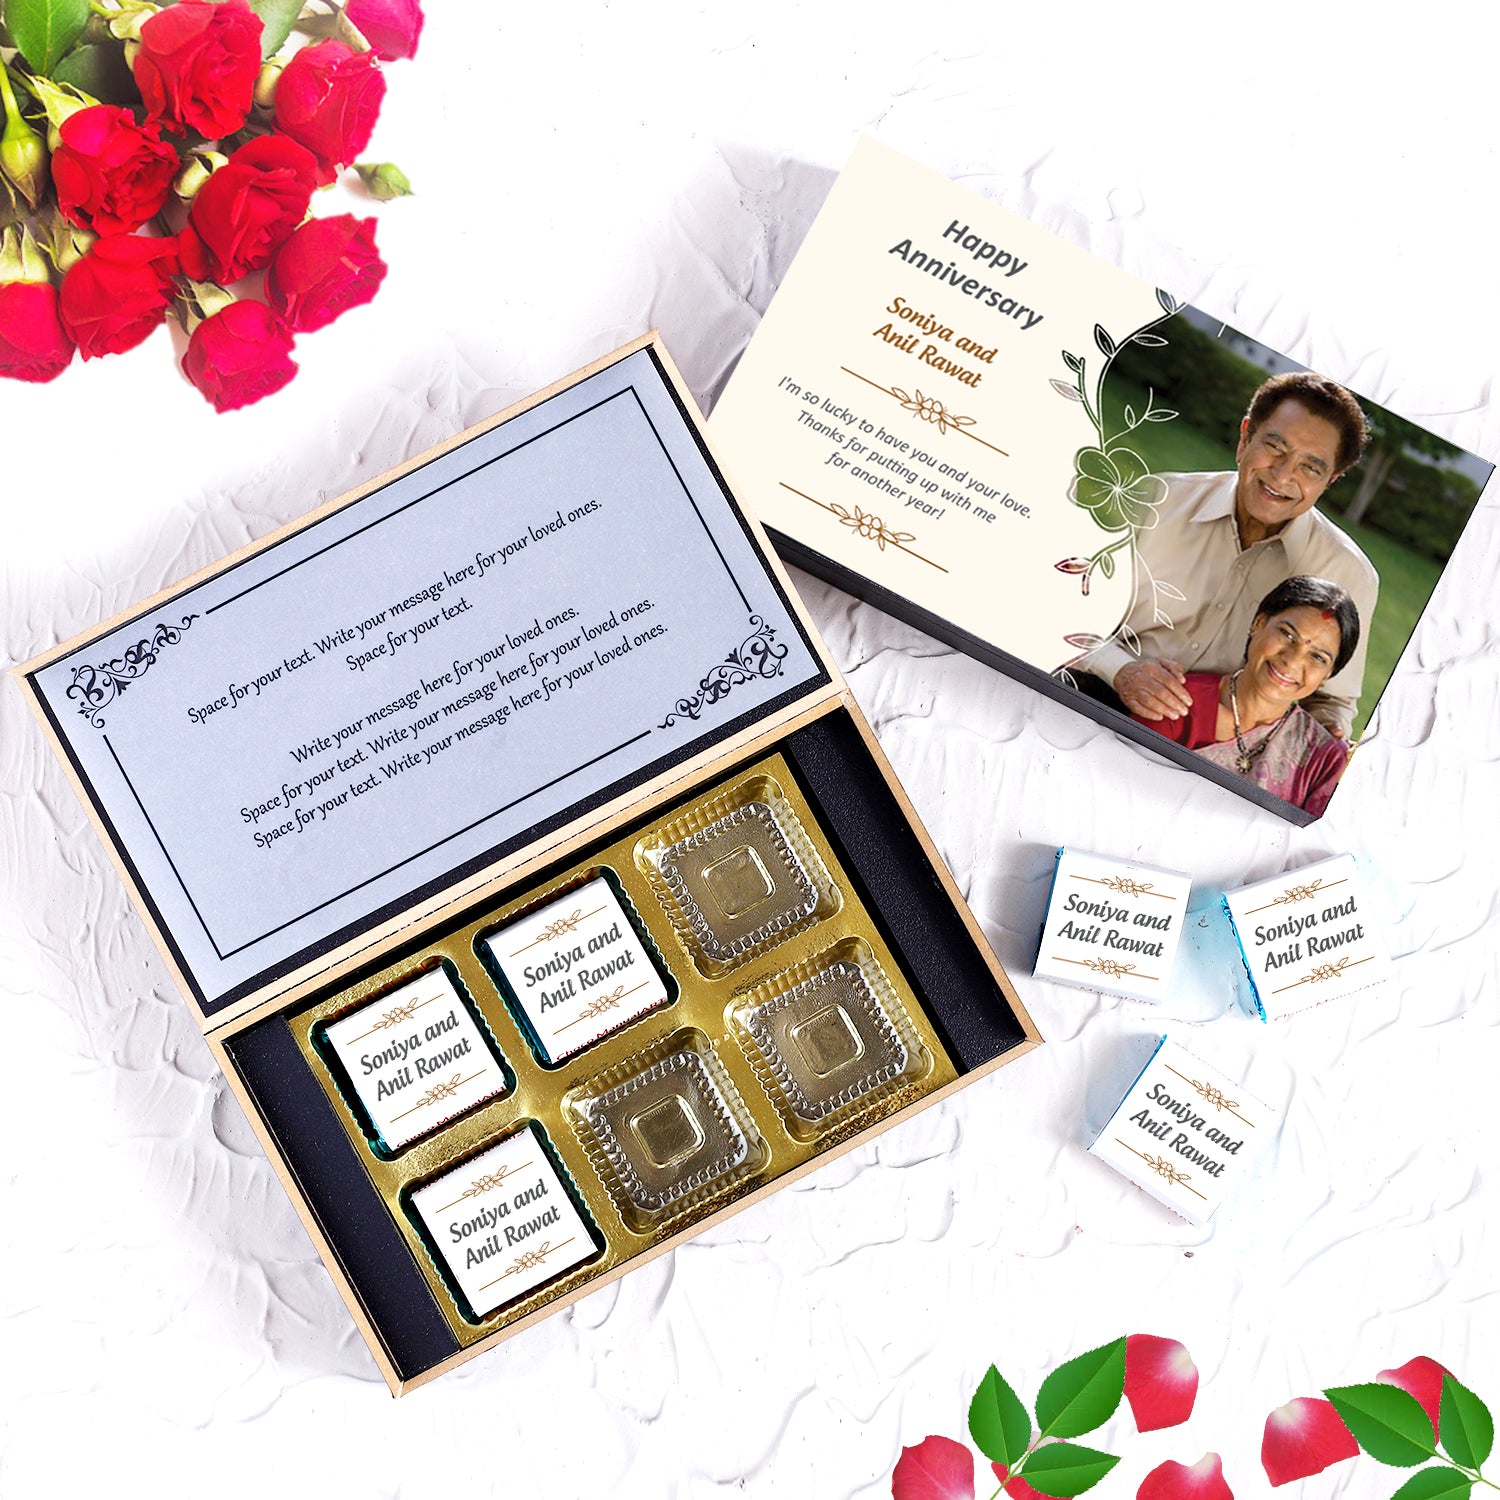 NAME PRINTED ON CHOCOLATES WITH DELICATE DESIGN  customized photo gifts of Wrapper printed chocolates on the occasion of a wedding anniversary